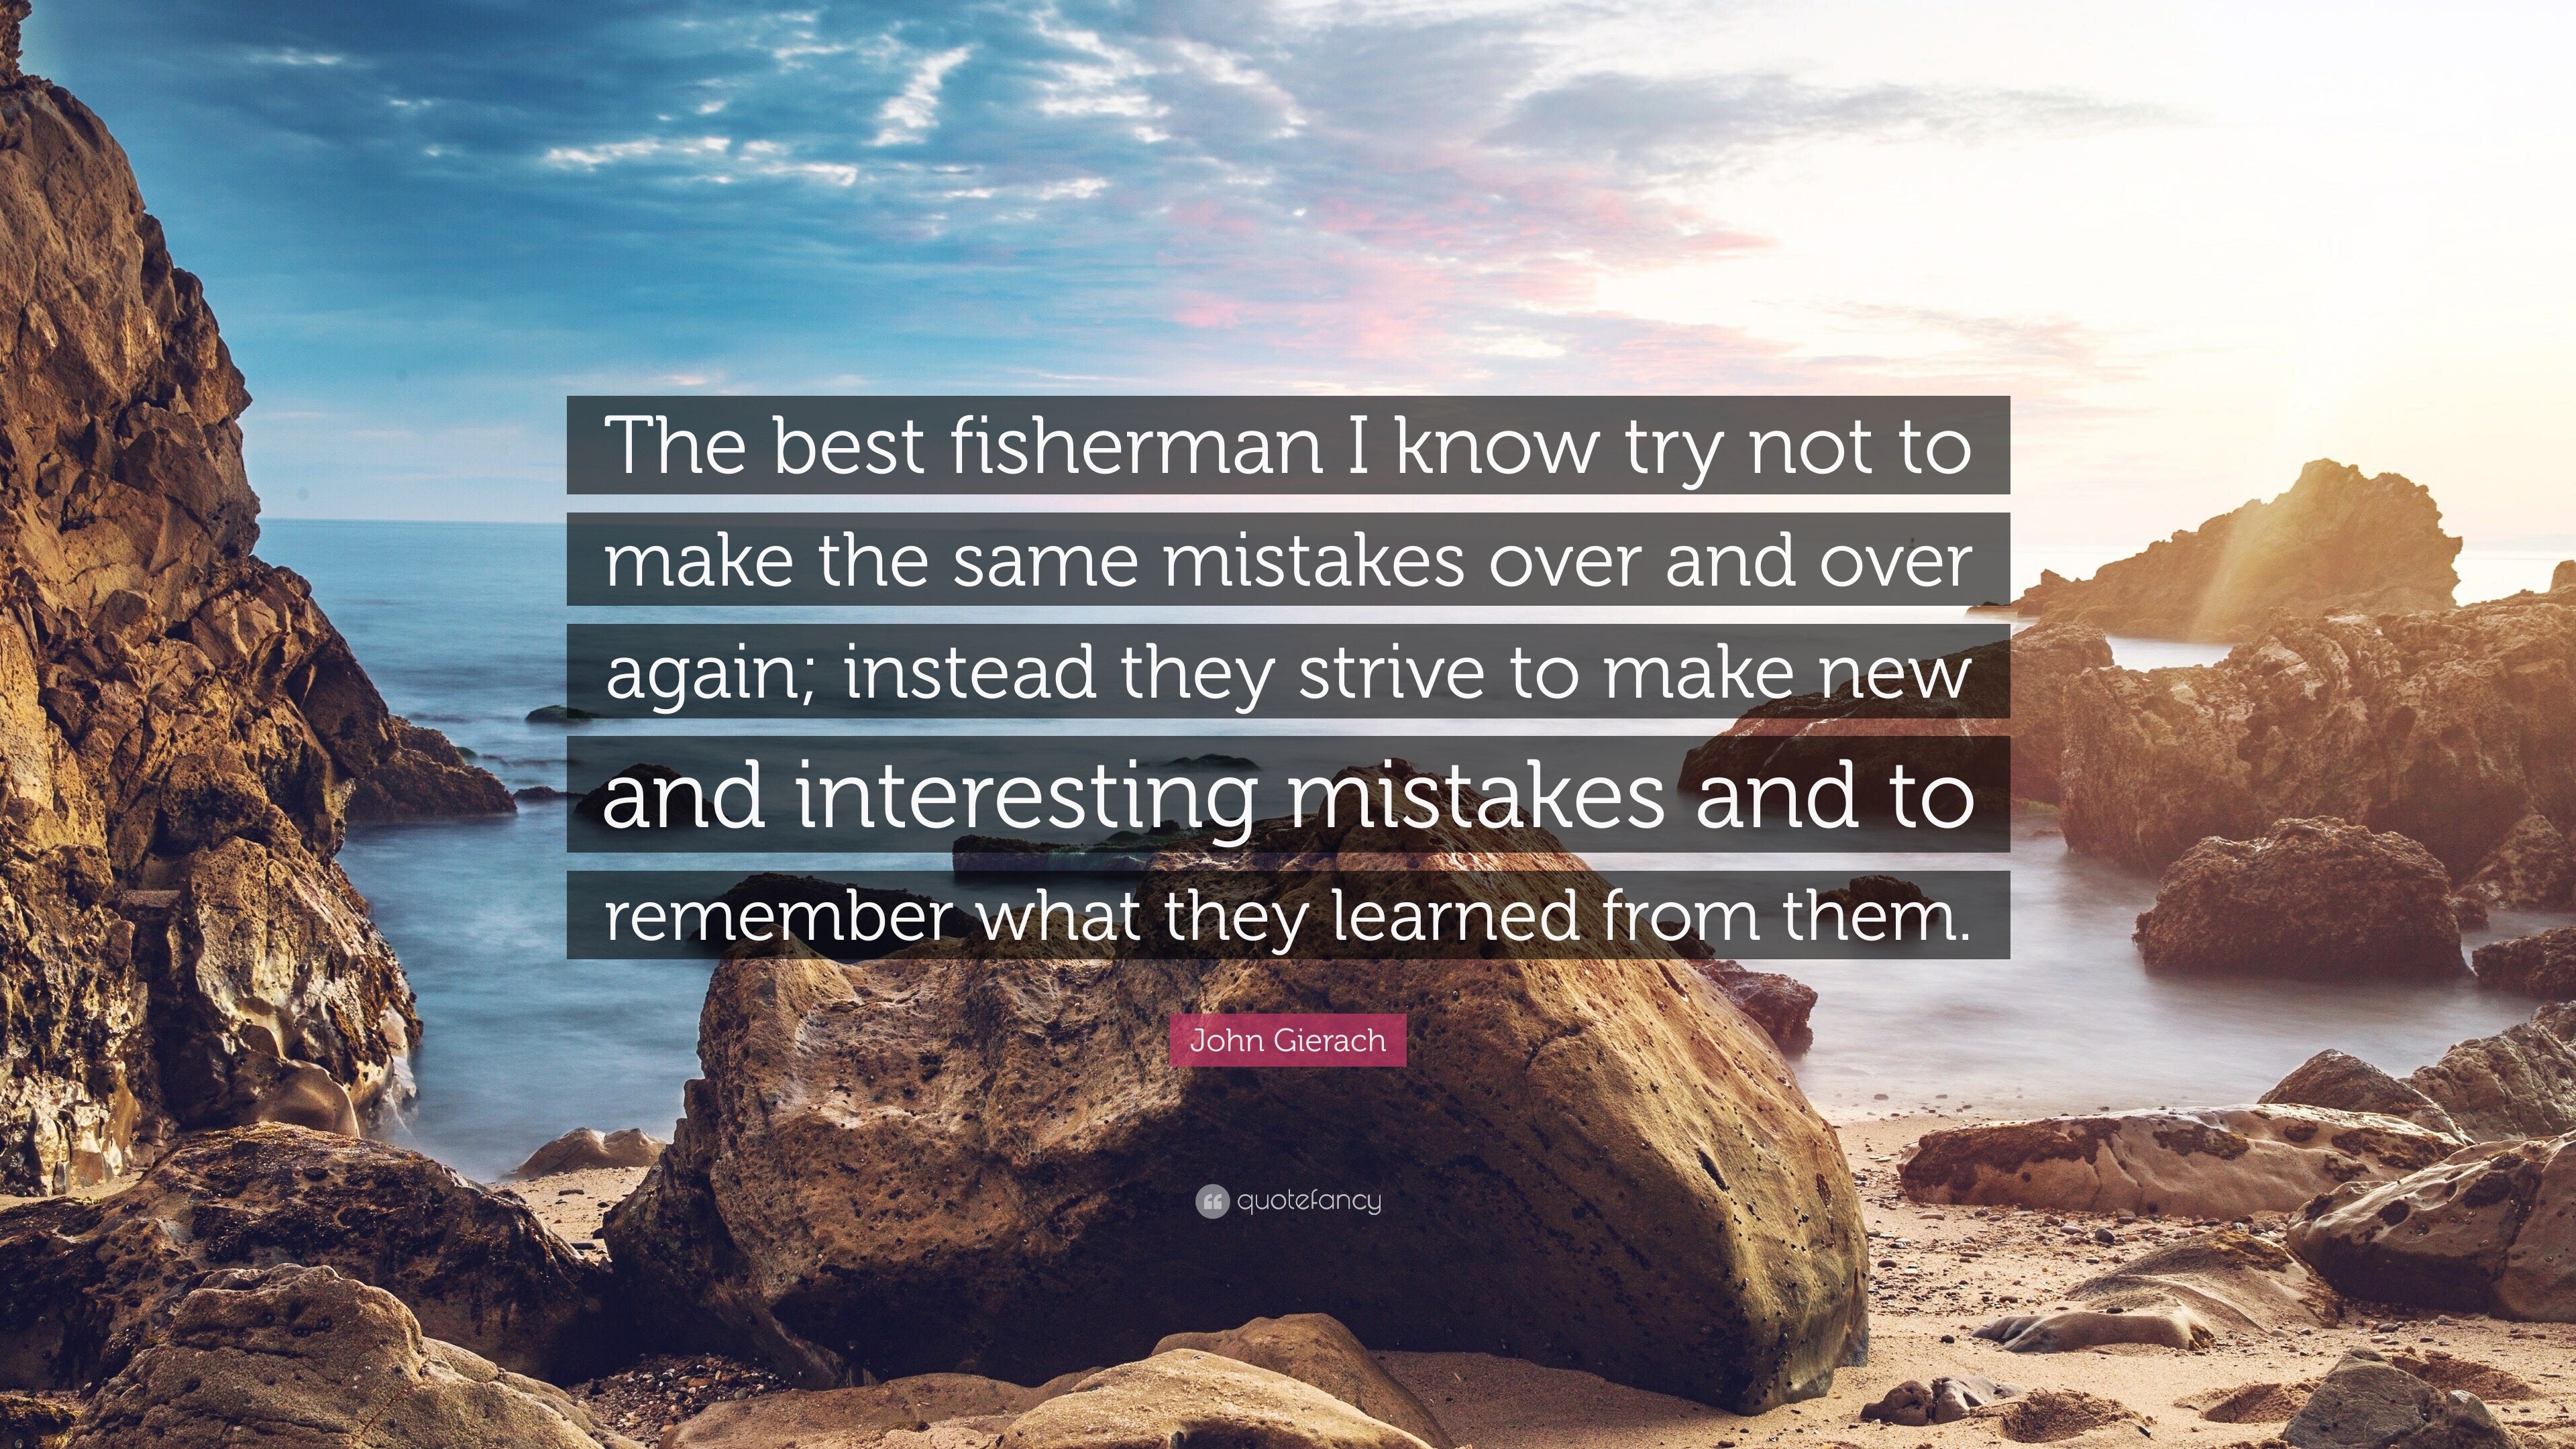 12 Common Mistakes: And How to Correct Them - The Fisherman